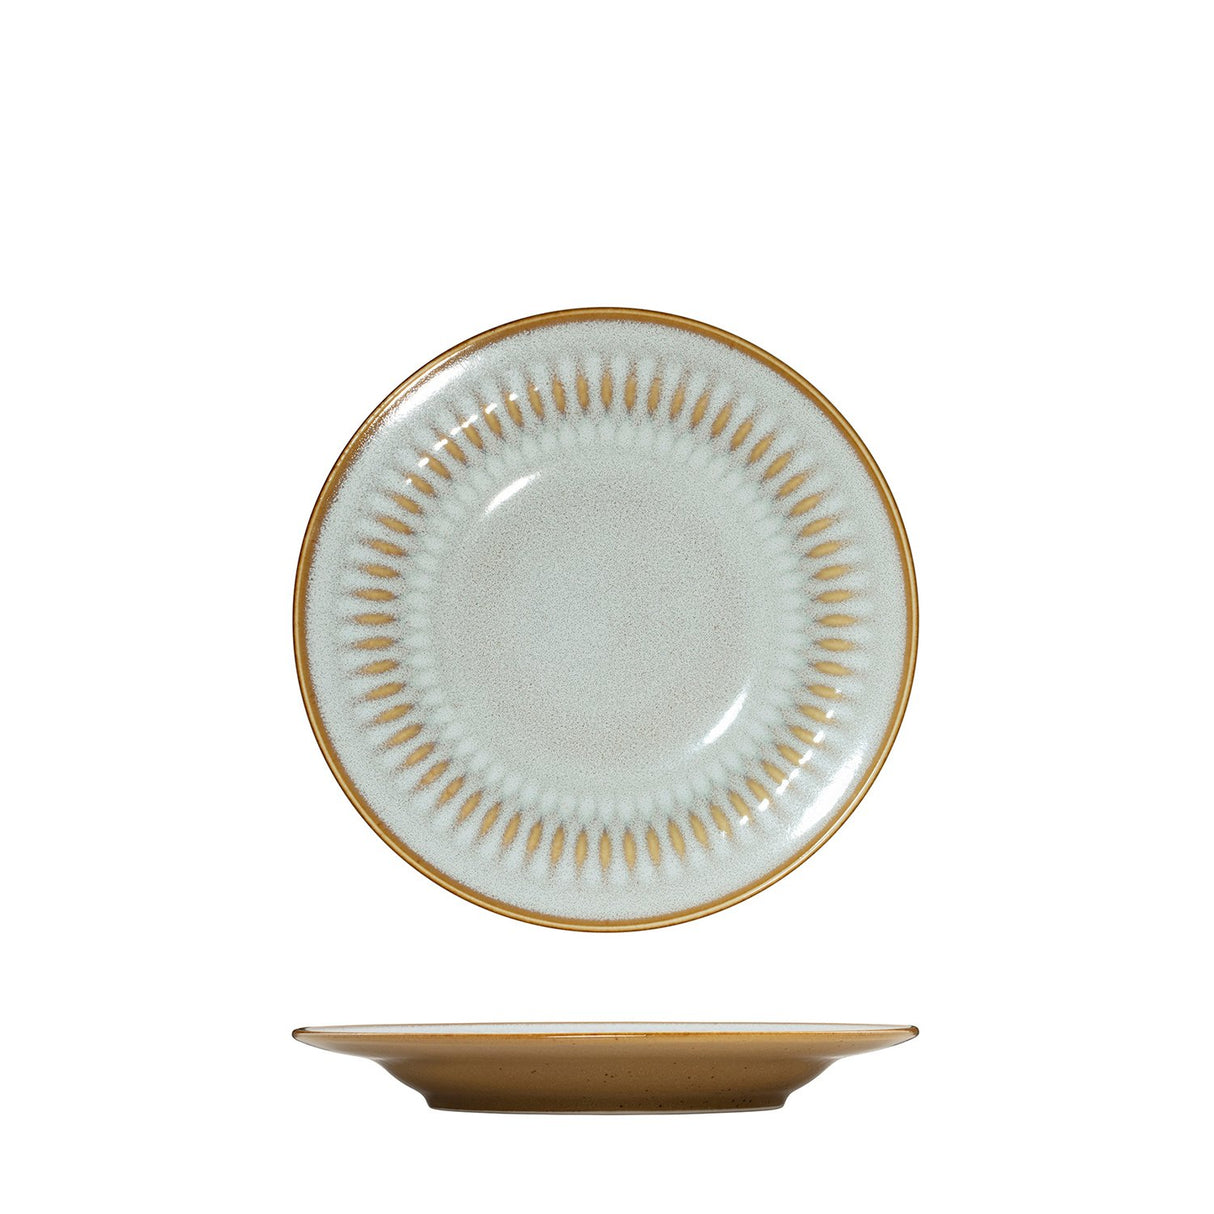 Round Rim Plate - 210Mm, Almond from Luzerne. Textured, made out of Ceramic and sold in boxes of 6. Hospitality quality at wholesale price with The Flying Fork! 